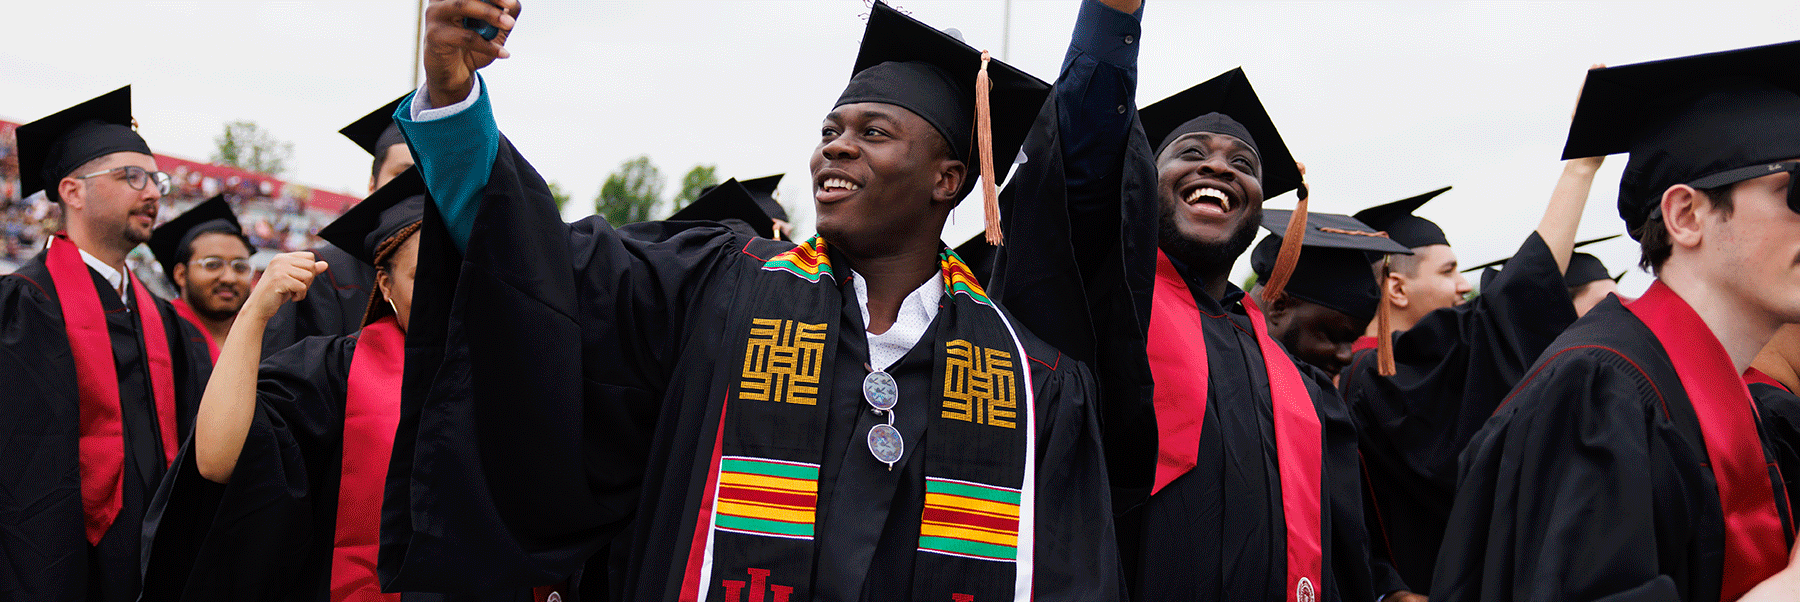 Two male graduates smile in a crowd during commencement.